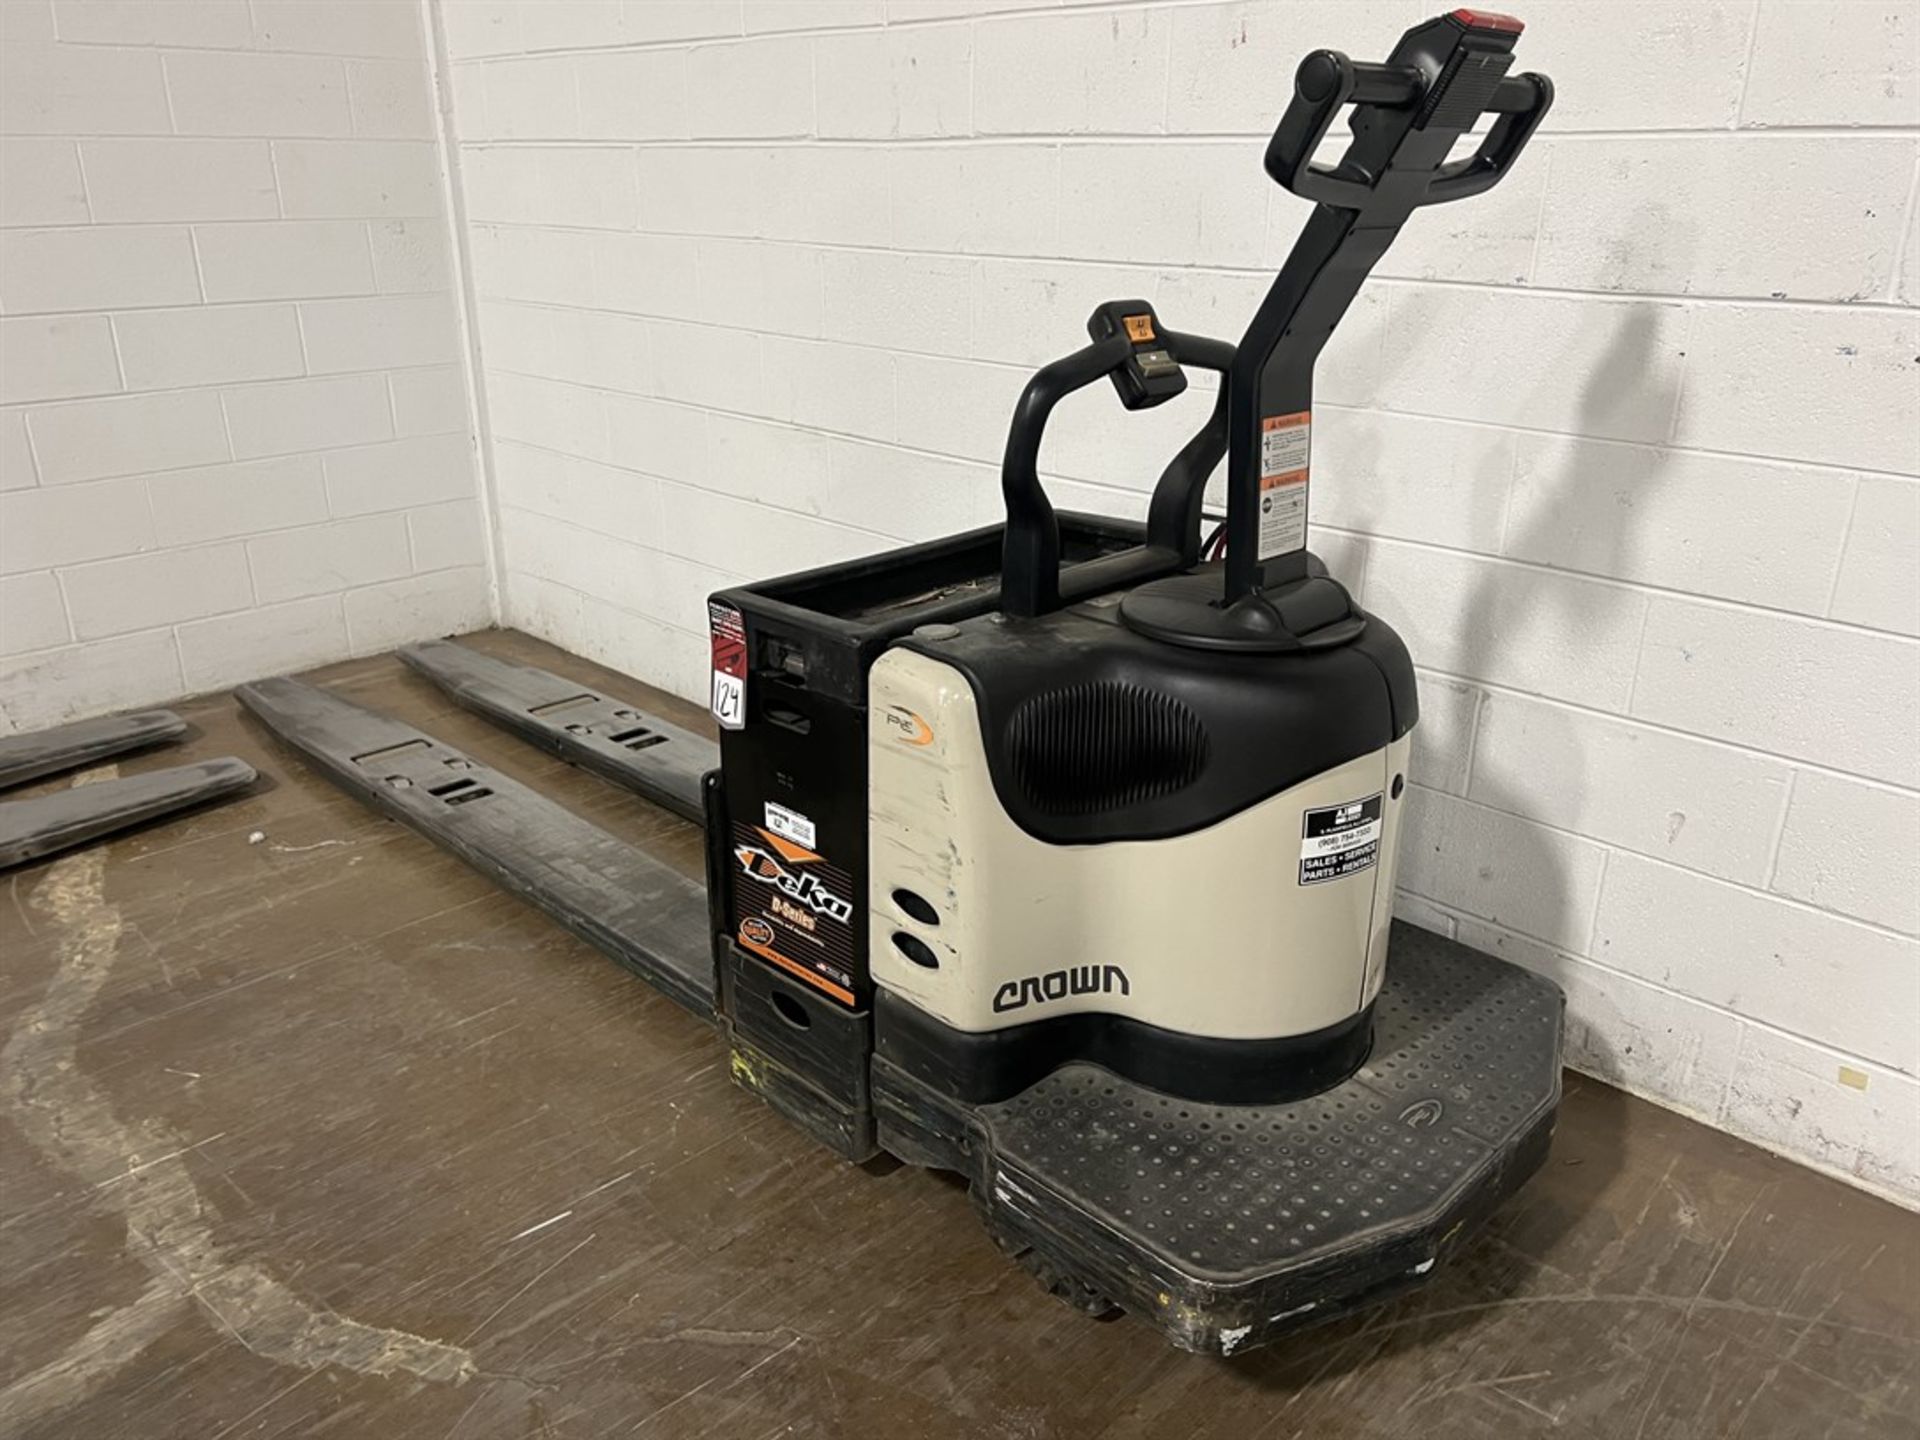 CROWN PE4000 Series Electric Rider Pallet Jack, s/n 6A217981, 6,000 Lb. Capacity, 24V, 8' Fork - Image 2 of 5